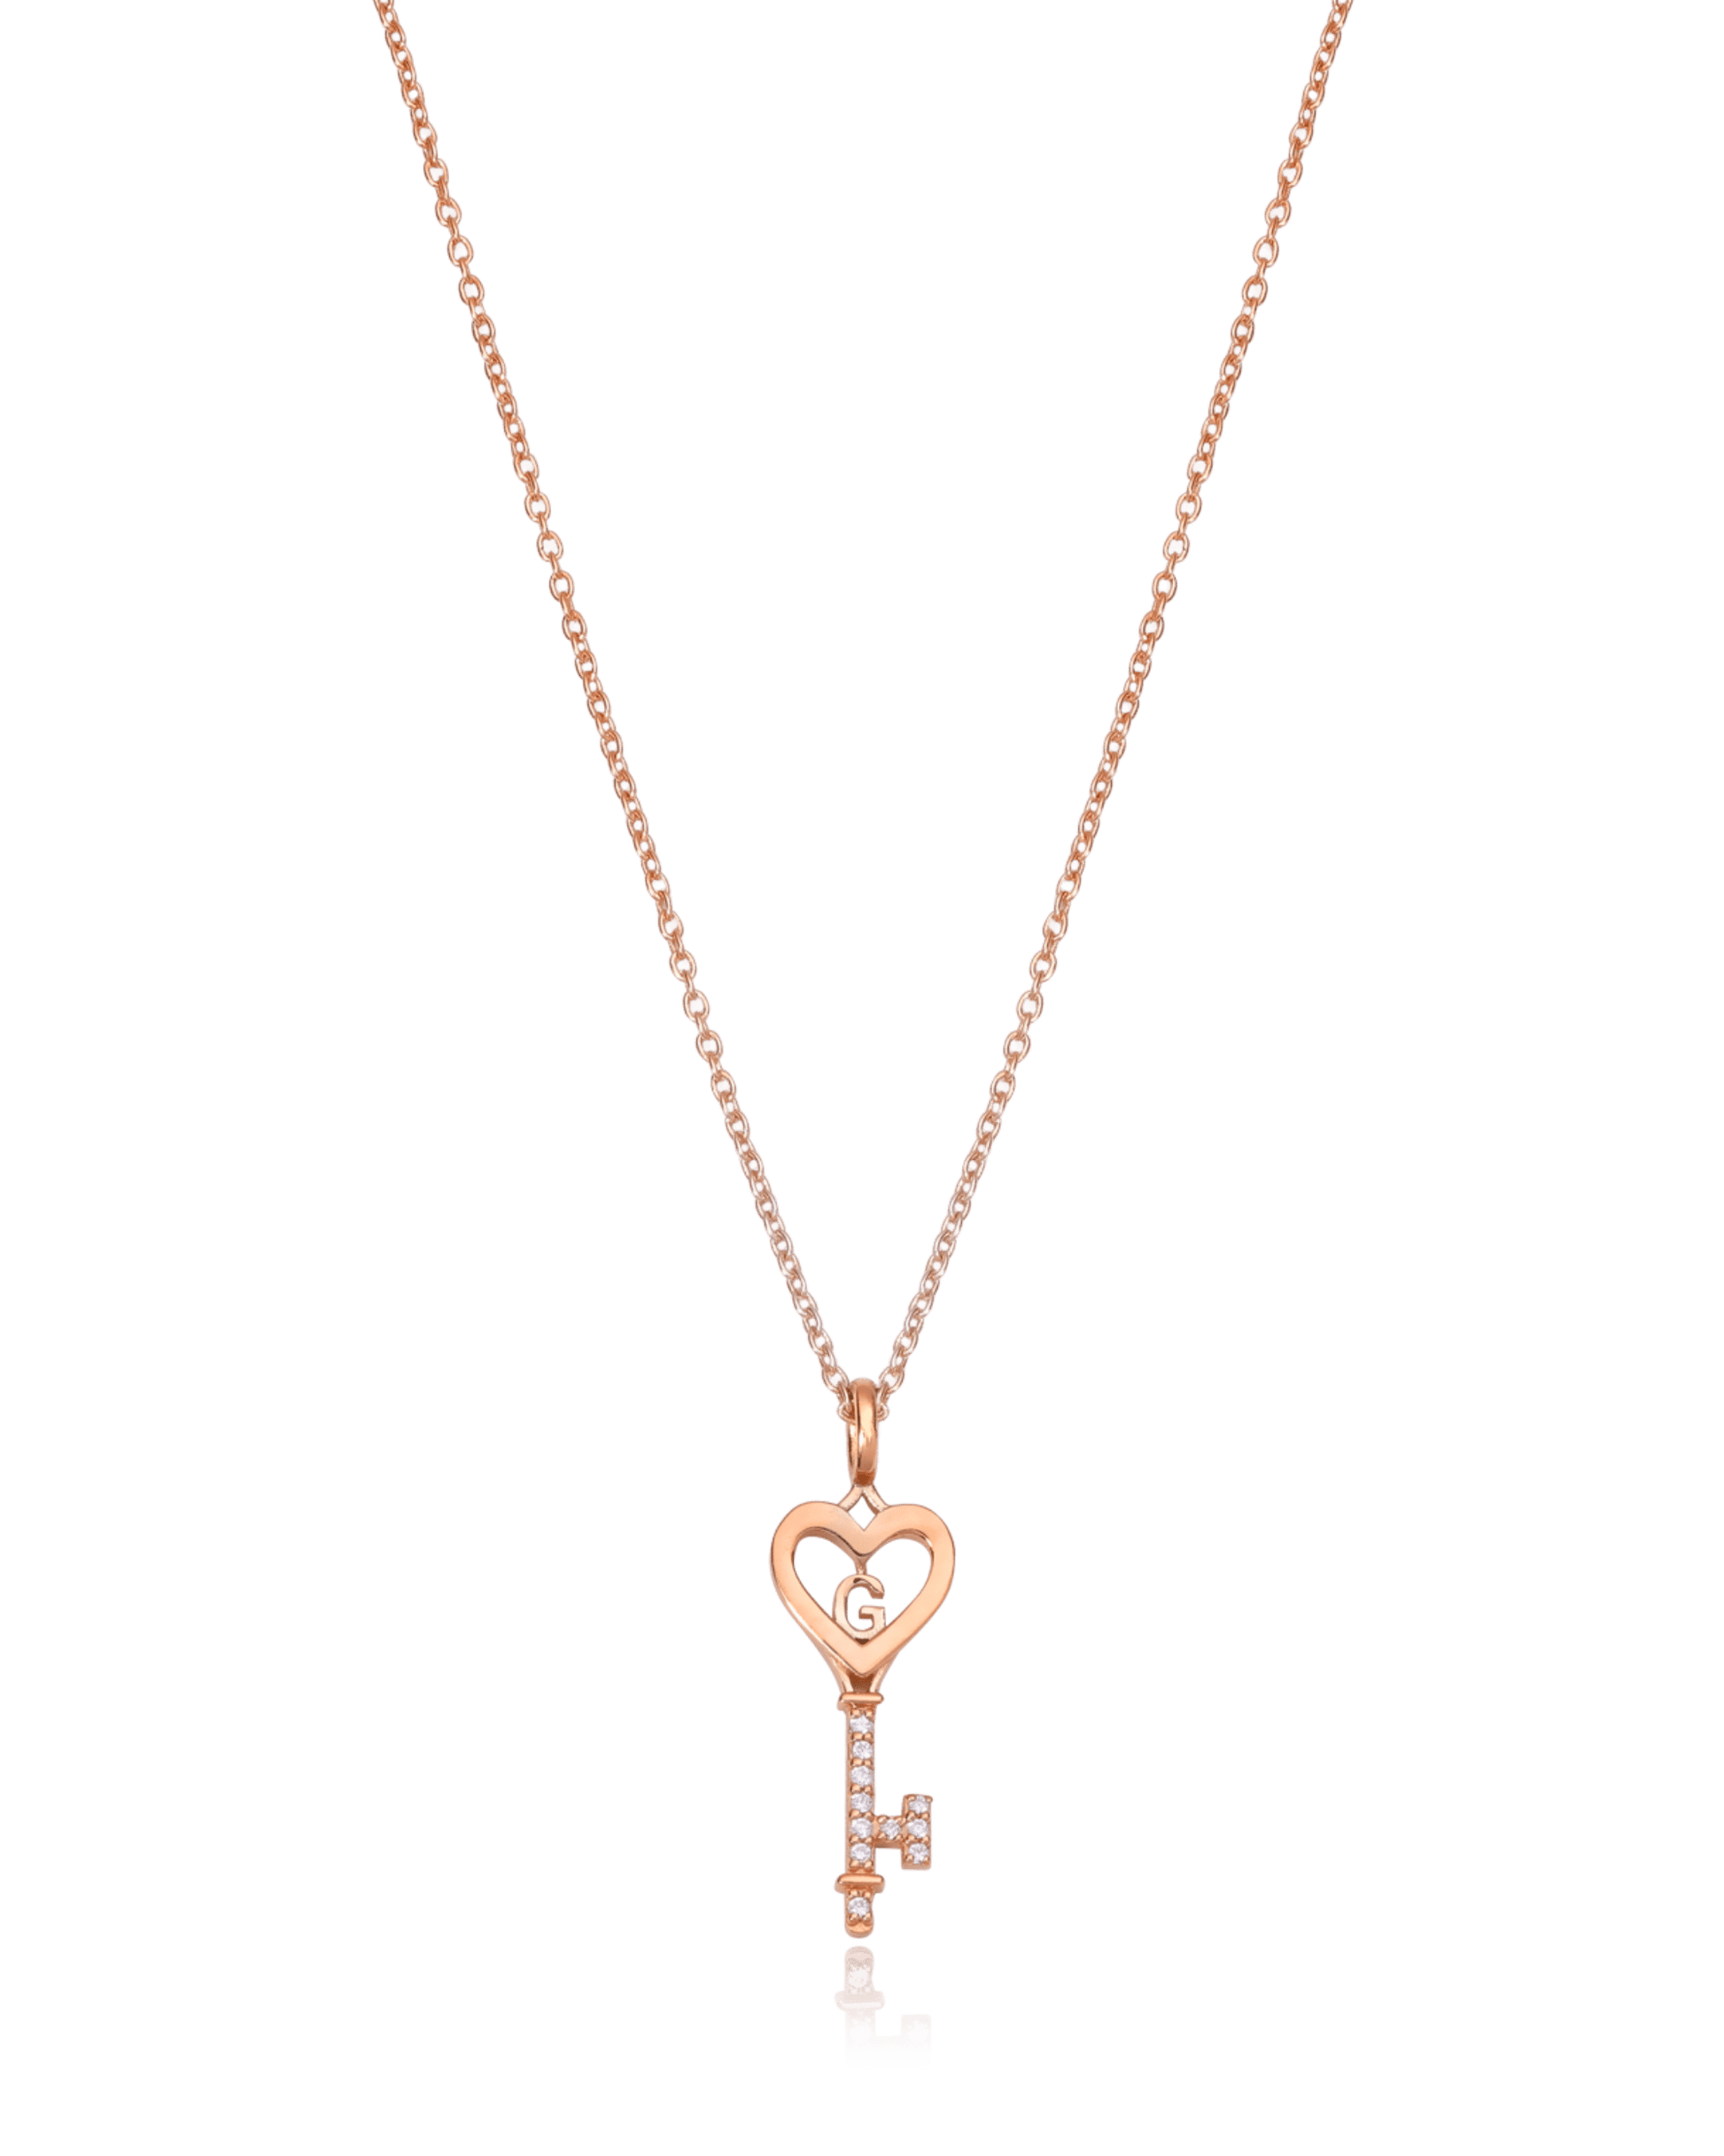 Key To My Heart Necklace with Diamond - 925 Sterling Silver Necklaces magal-dev 